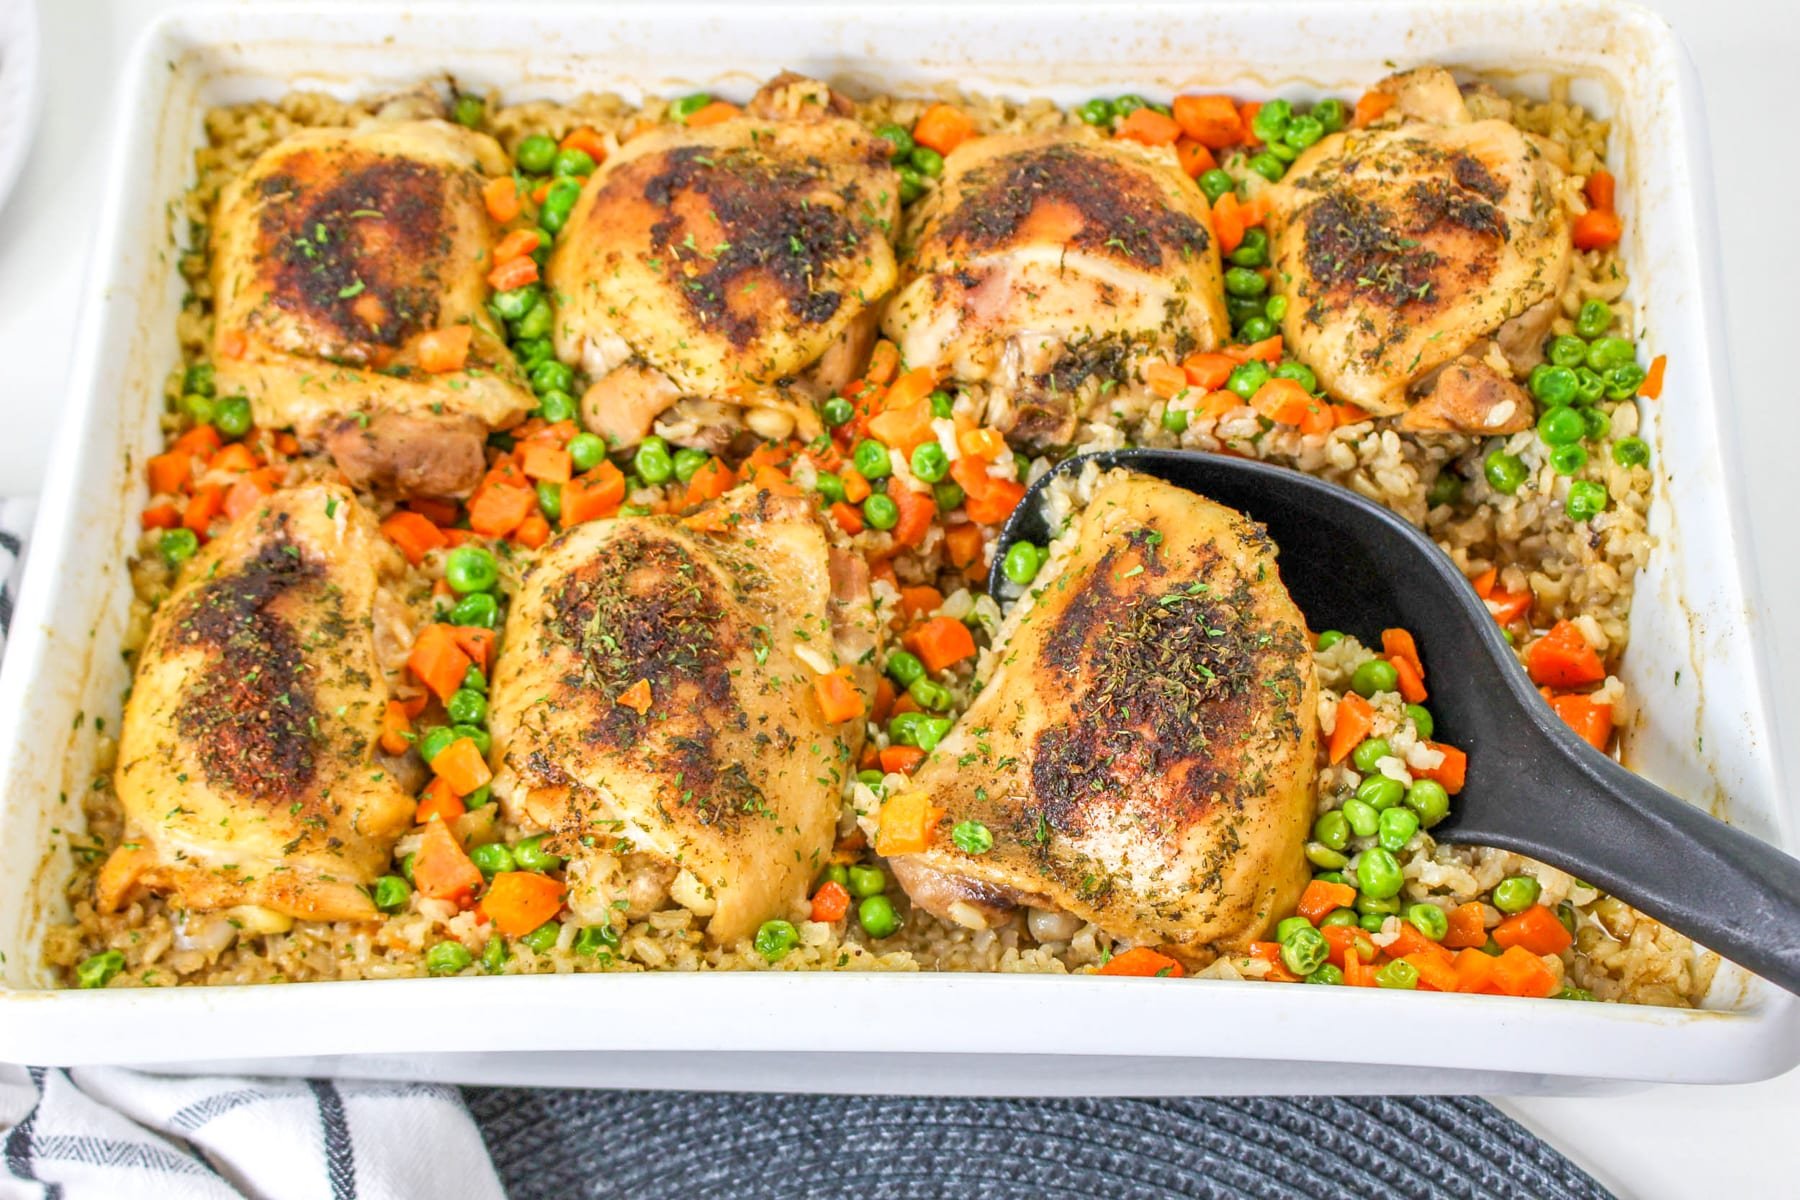 Chicken and Brown Rice Casserole in baking dish with serving spoon.